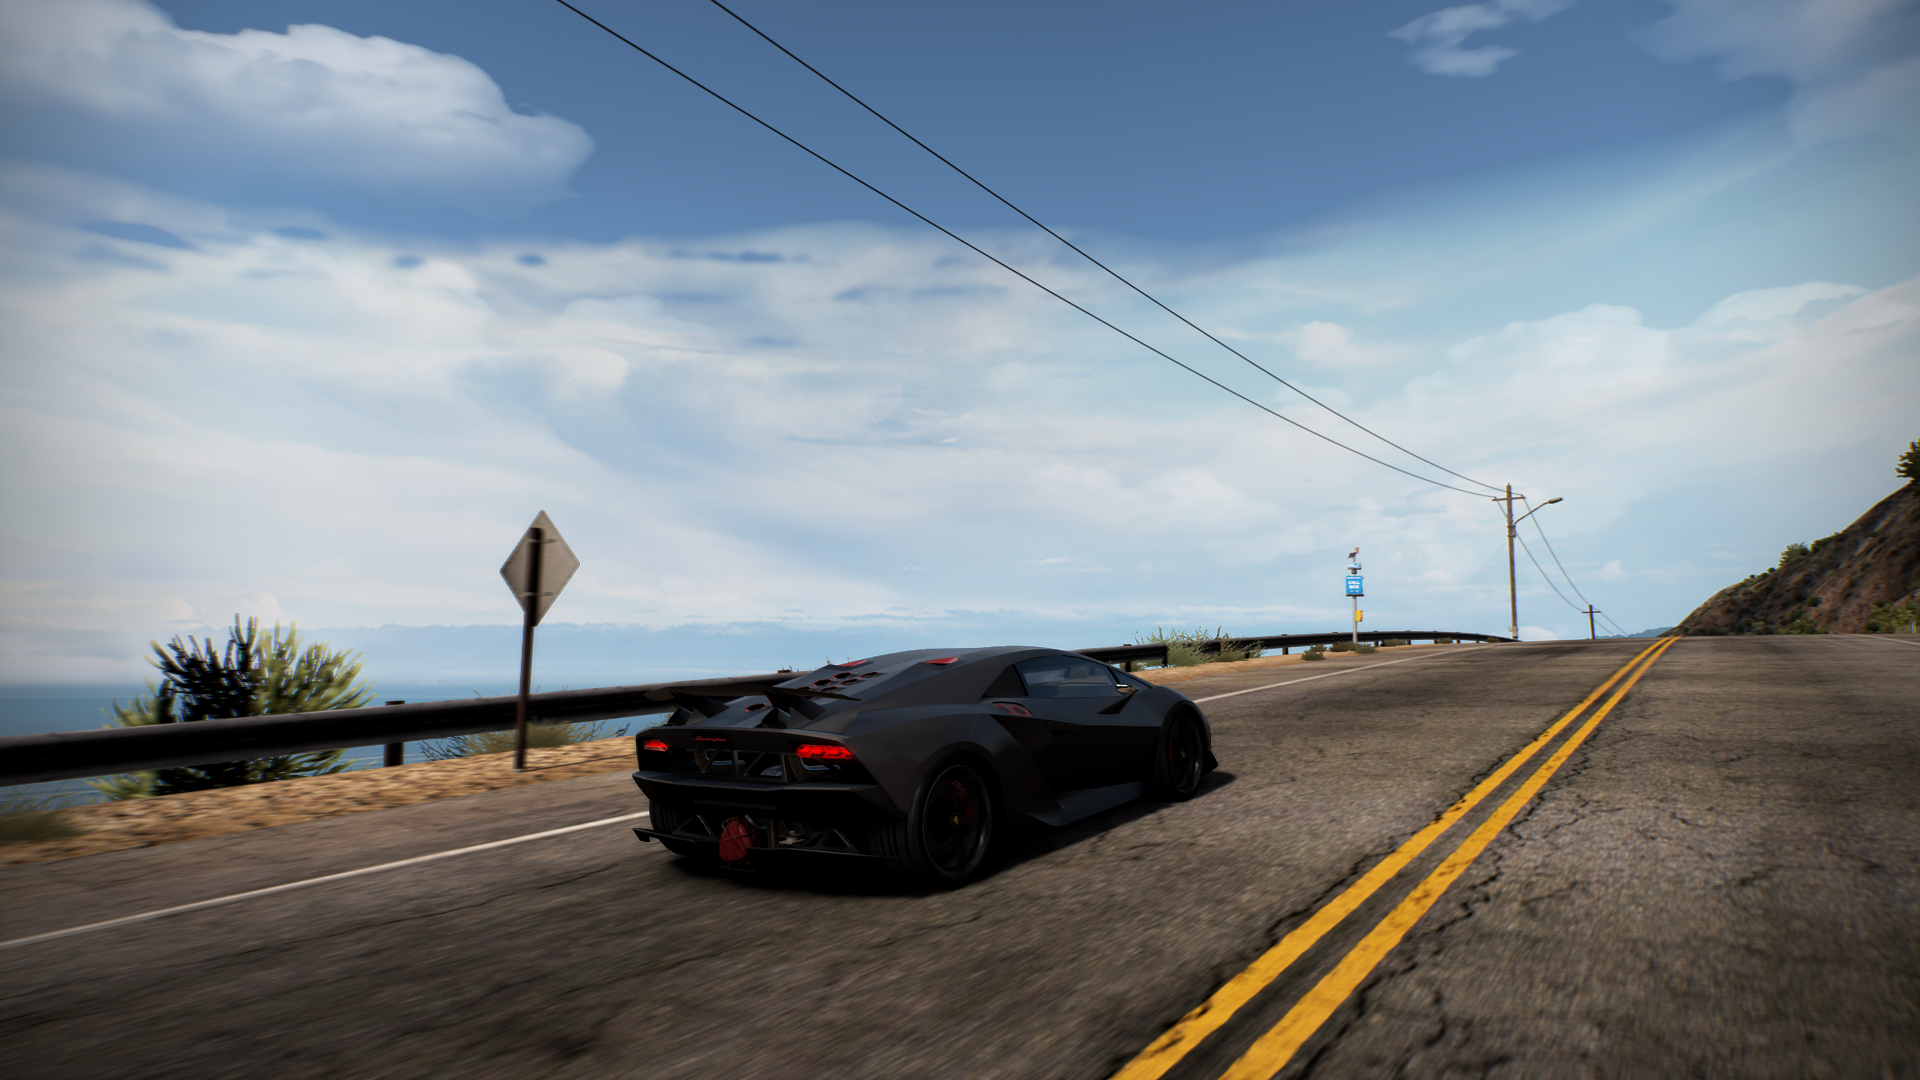 Need For Speed Need For Speed Hot Pursuit Lamborghini Sesto Elemento Car 1920x1080